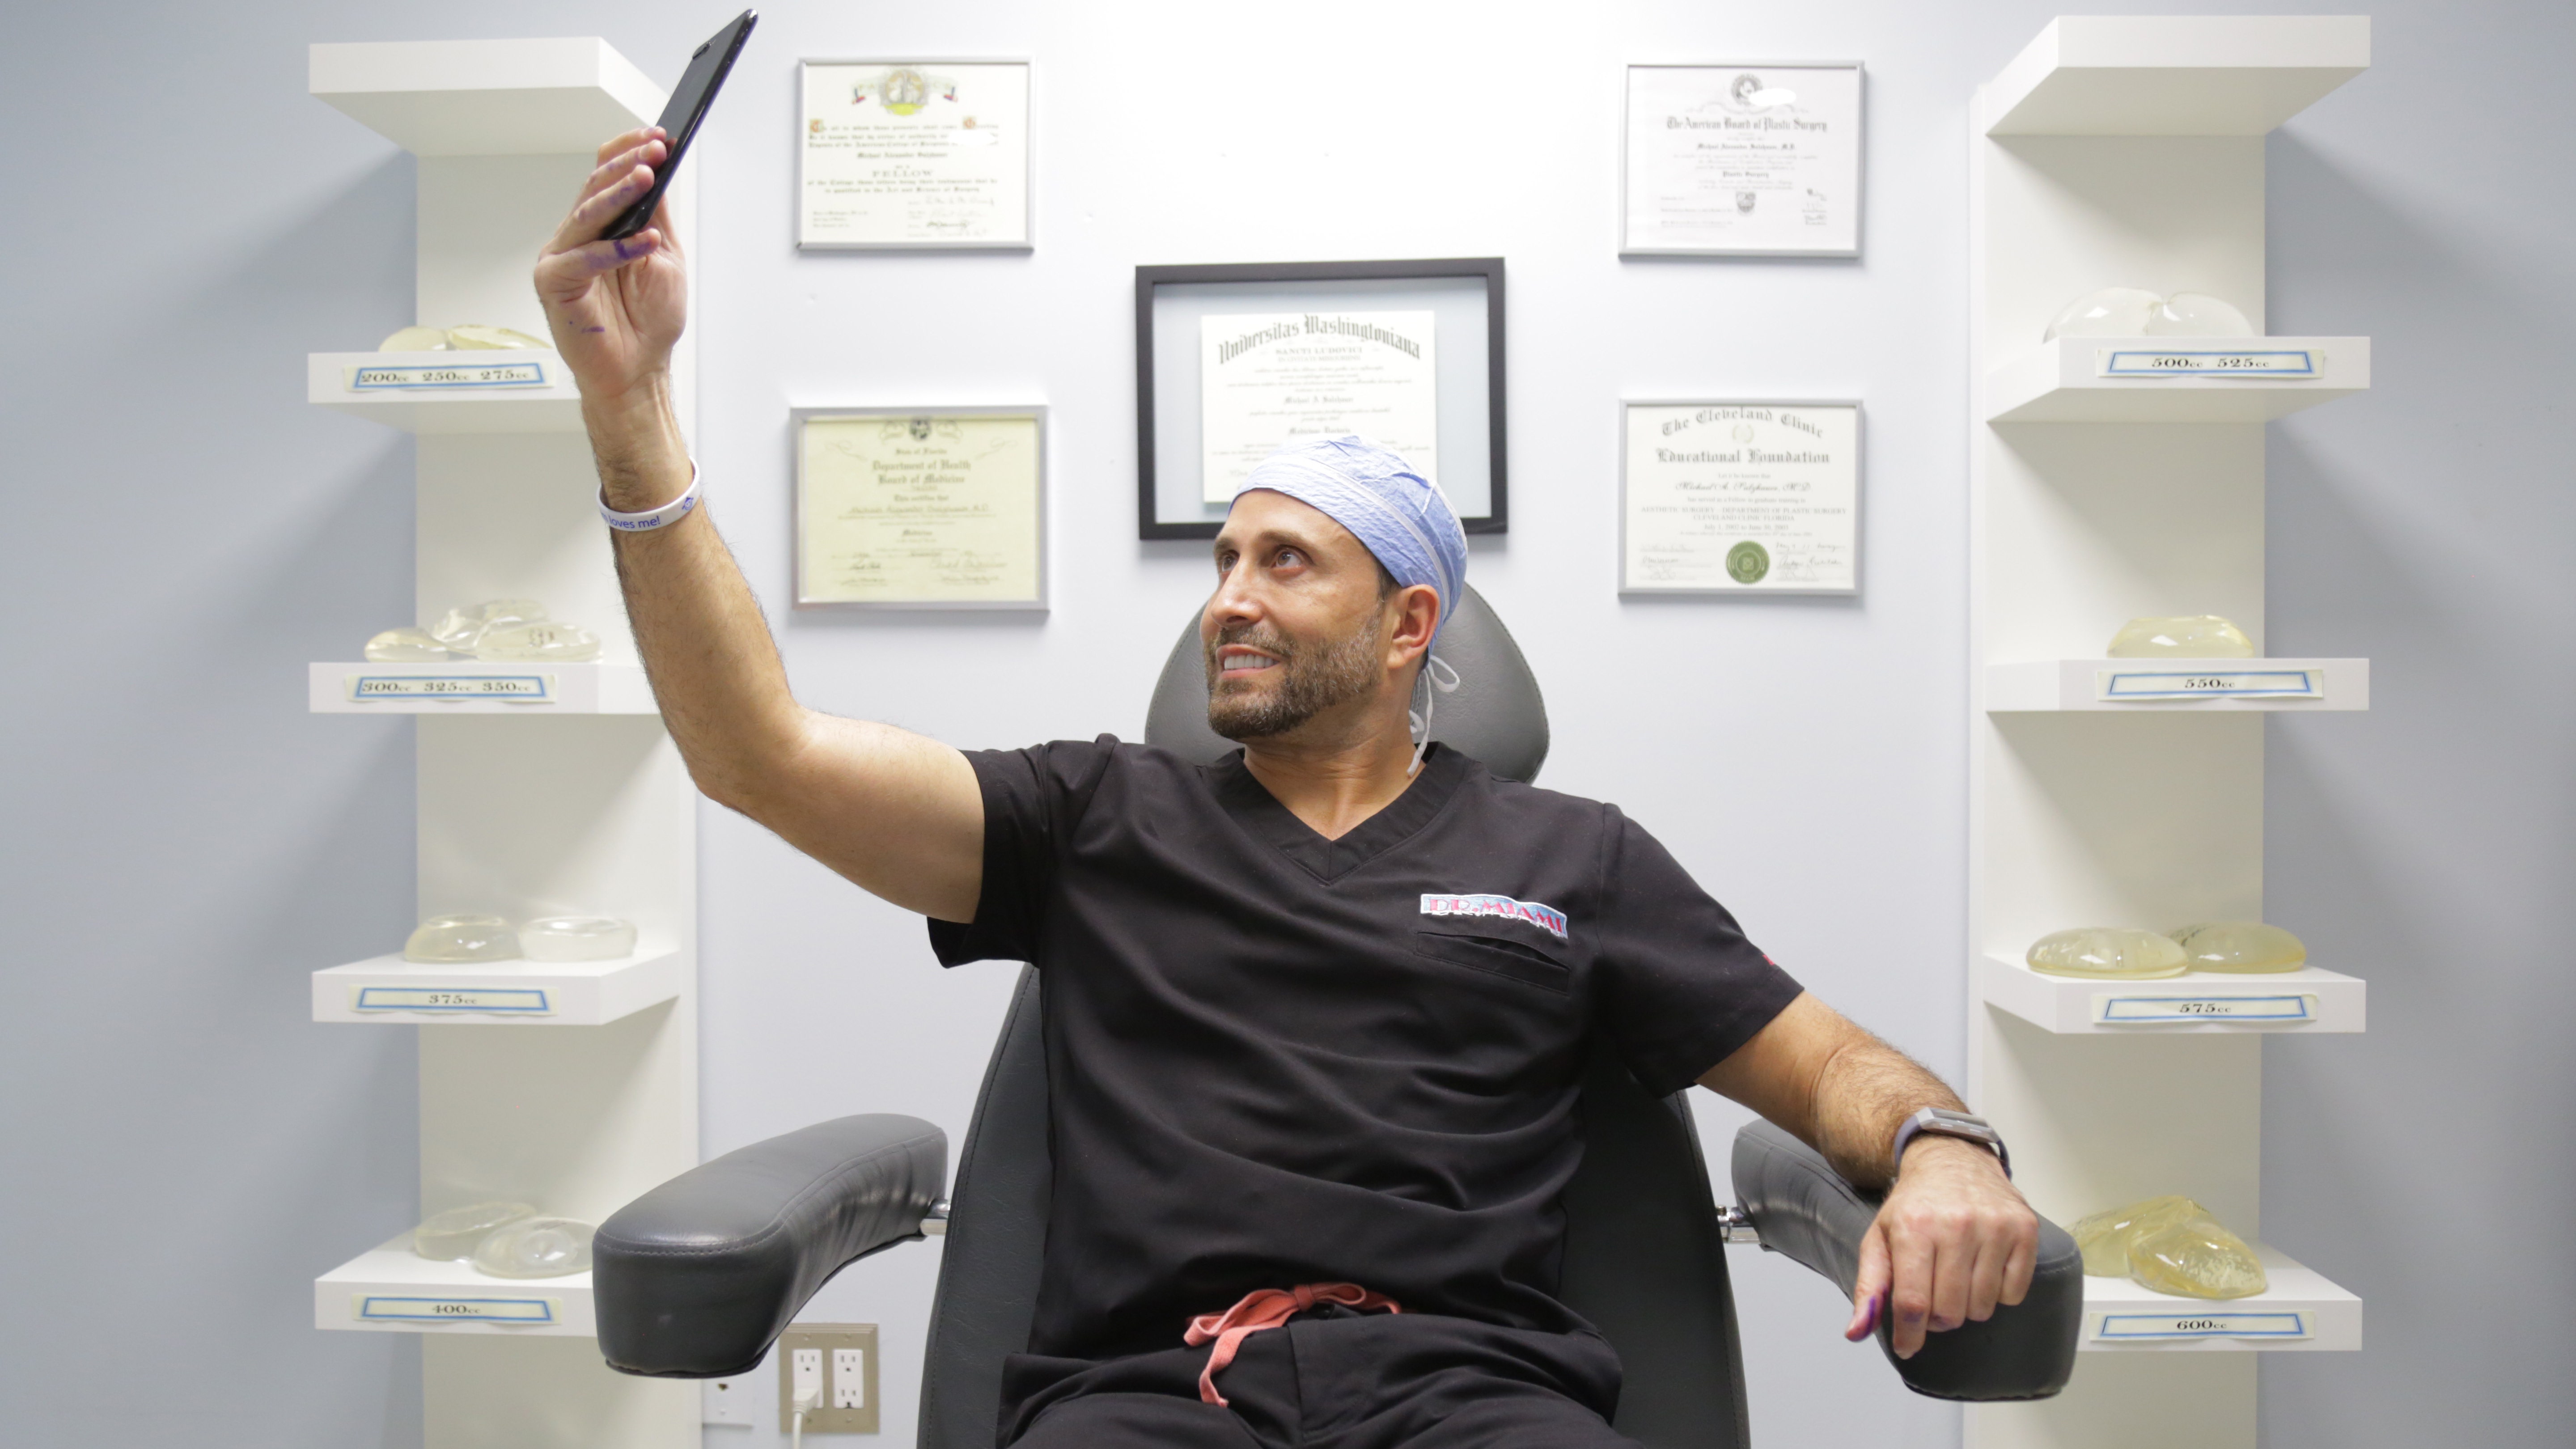 Dr. Miami, aka plastic surgeon Michael Salzhauer, fine with being controversial: 'Not everybody's cup of tea'